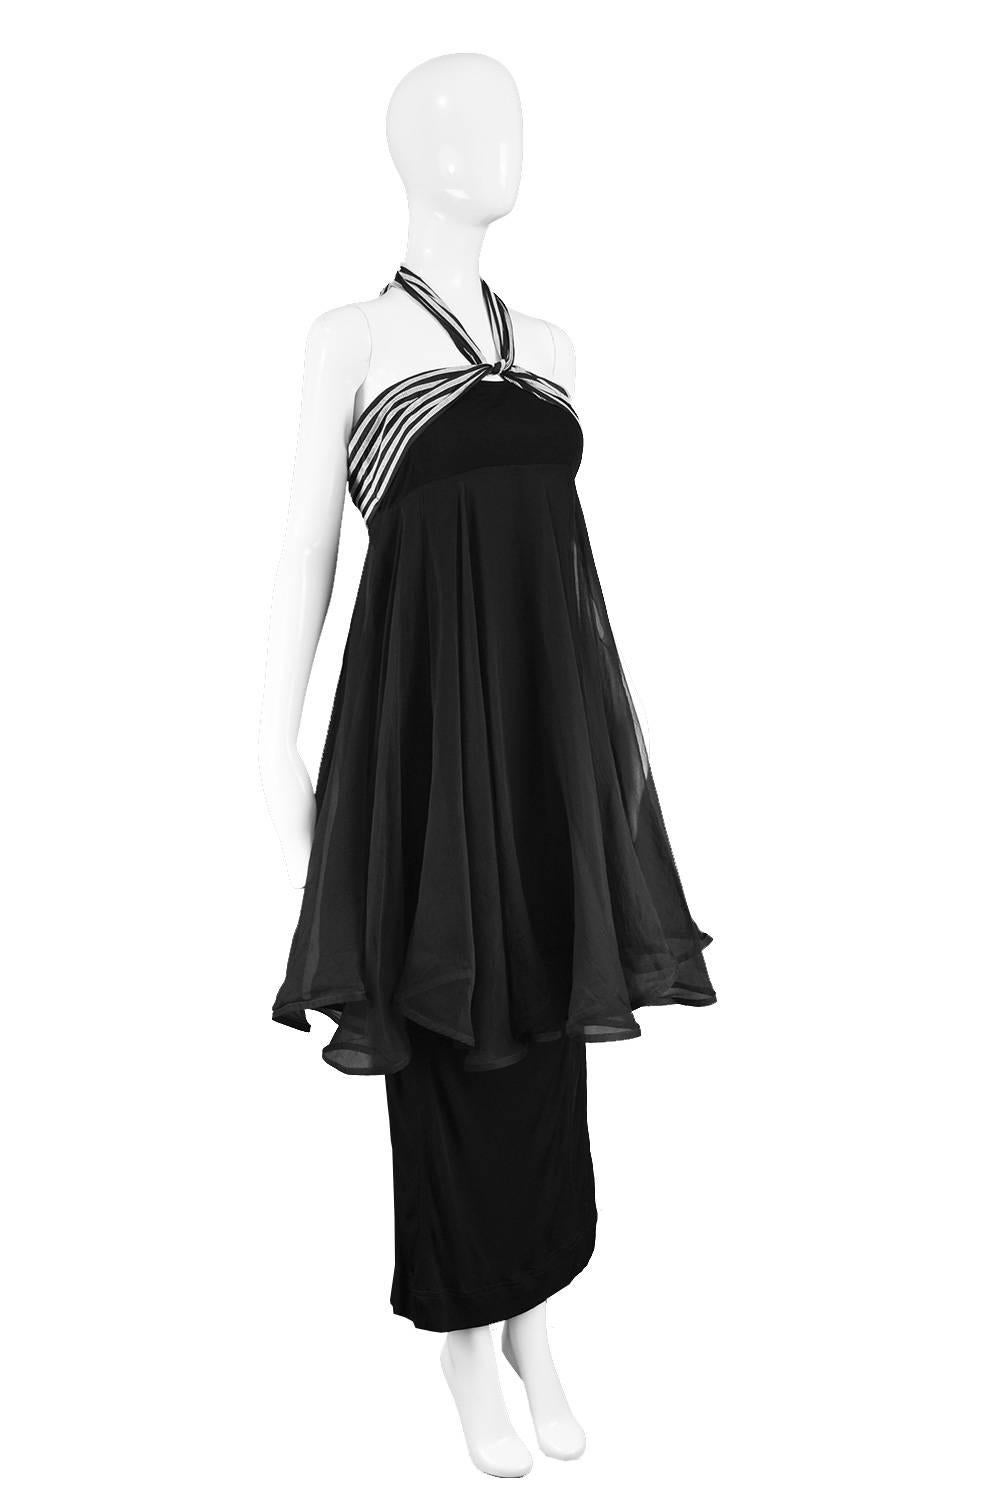 Angelo Tarlazzi Tiered Silk Chiffon and Black Jersey Halter Evening Dress, 1980s In Good Condition For Sale In Doncaster, South Yorkshire